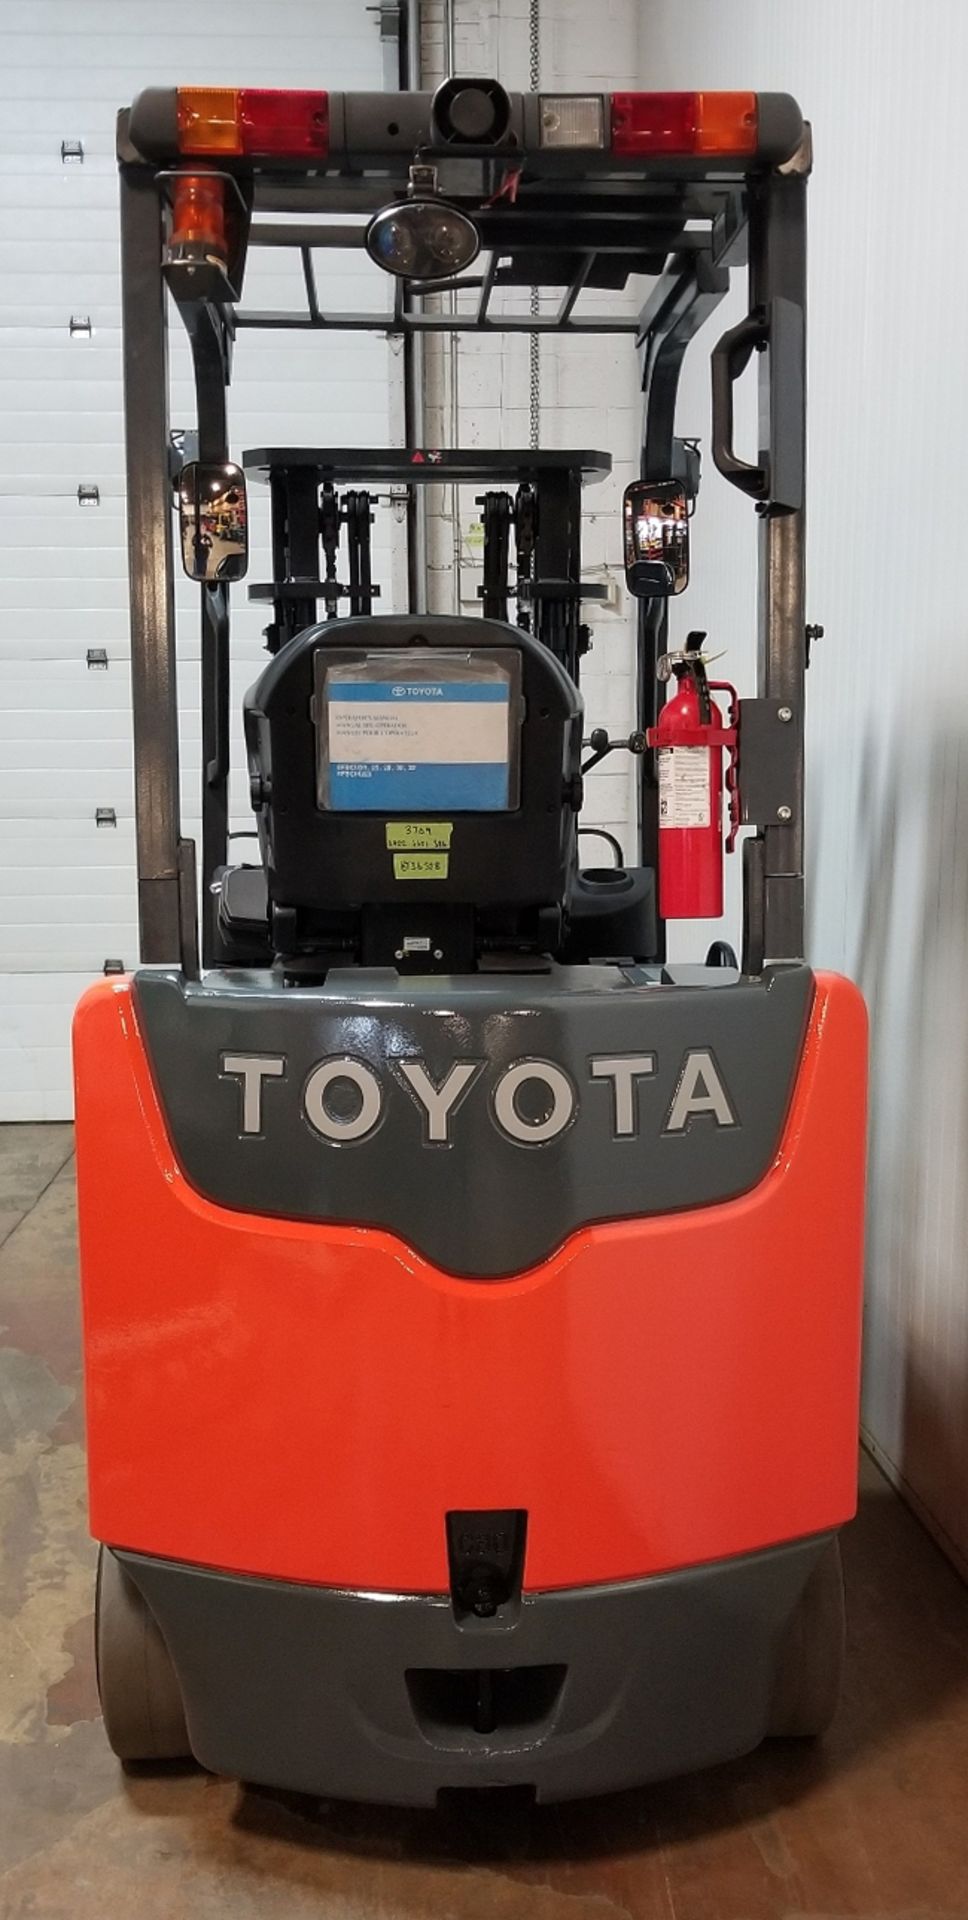 TOYOTA (2015) 8FBCU30 6,000 LB. 36V ELECTRIC FORKLIFT WITH 131" MAX. LIFT HEIGHT, SIDE SHIFT, - Bild 3 aus 3